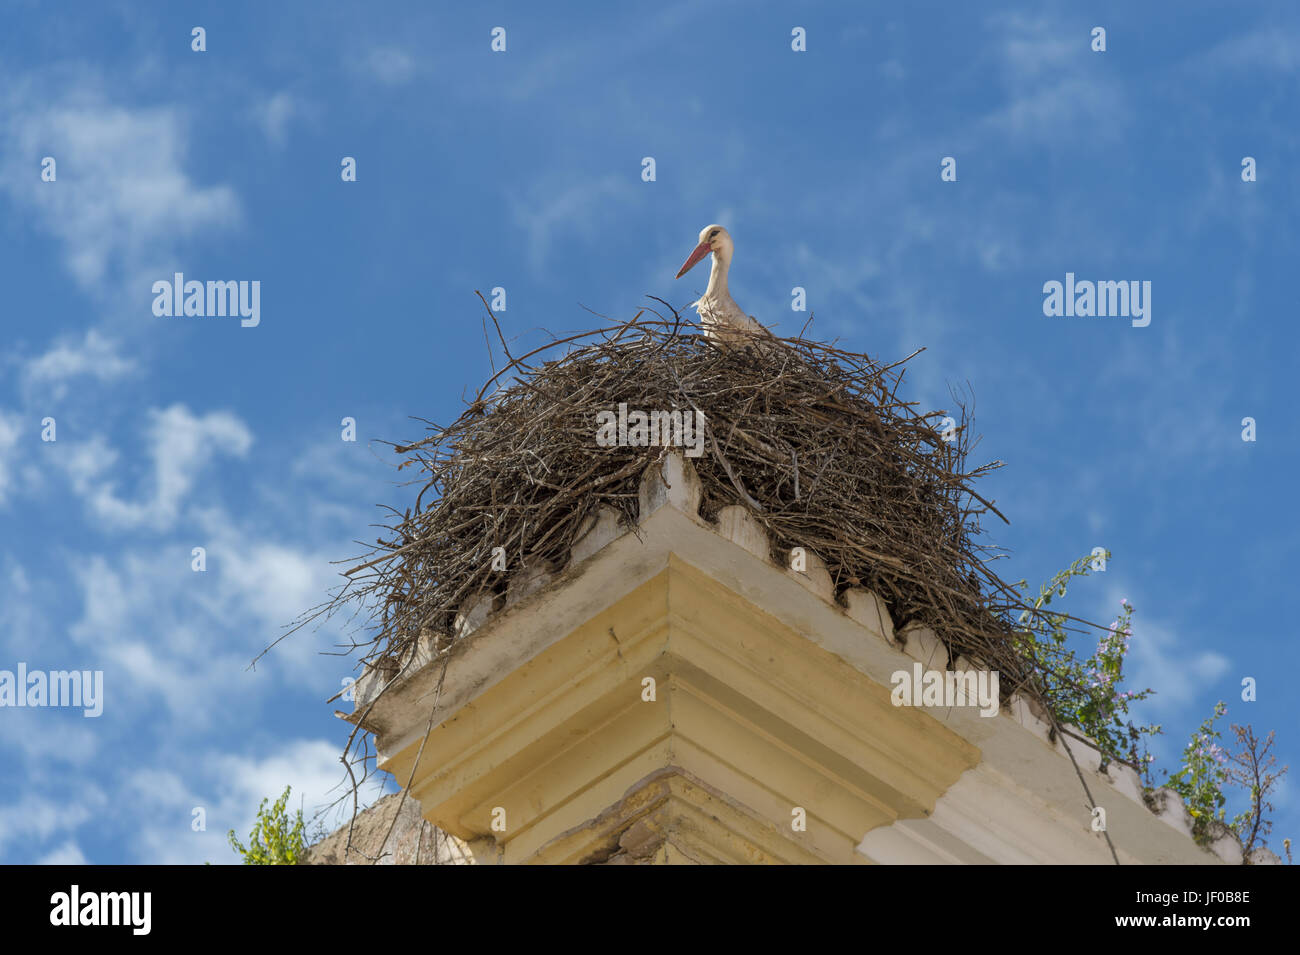 A stork looks over the edge of a nest Stock Photo